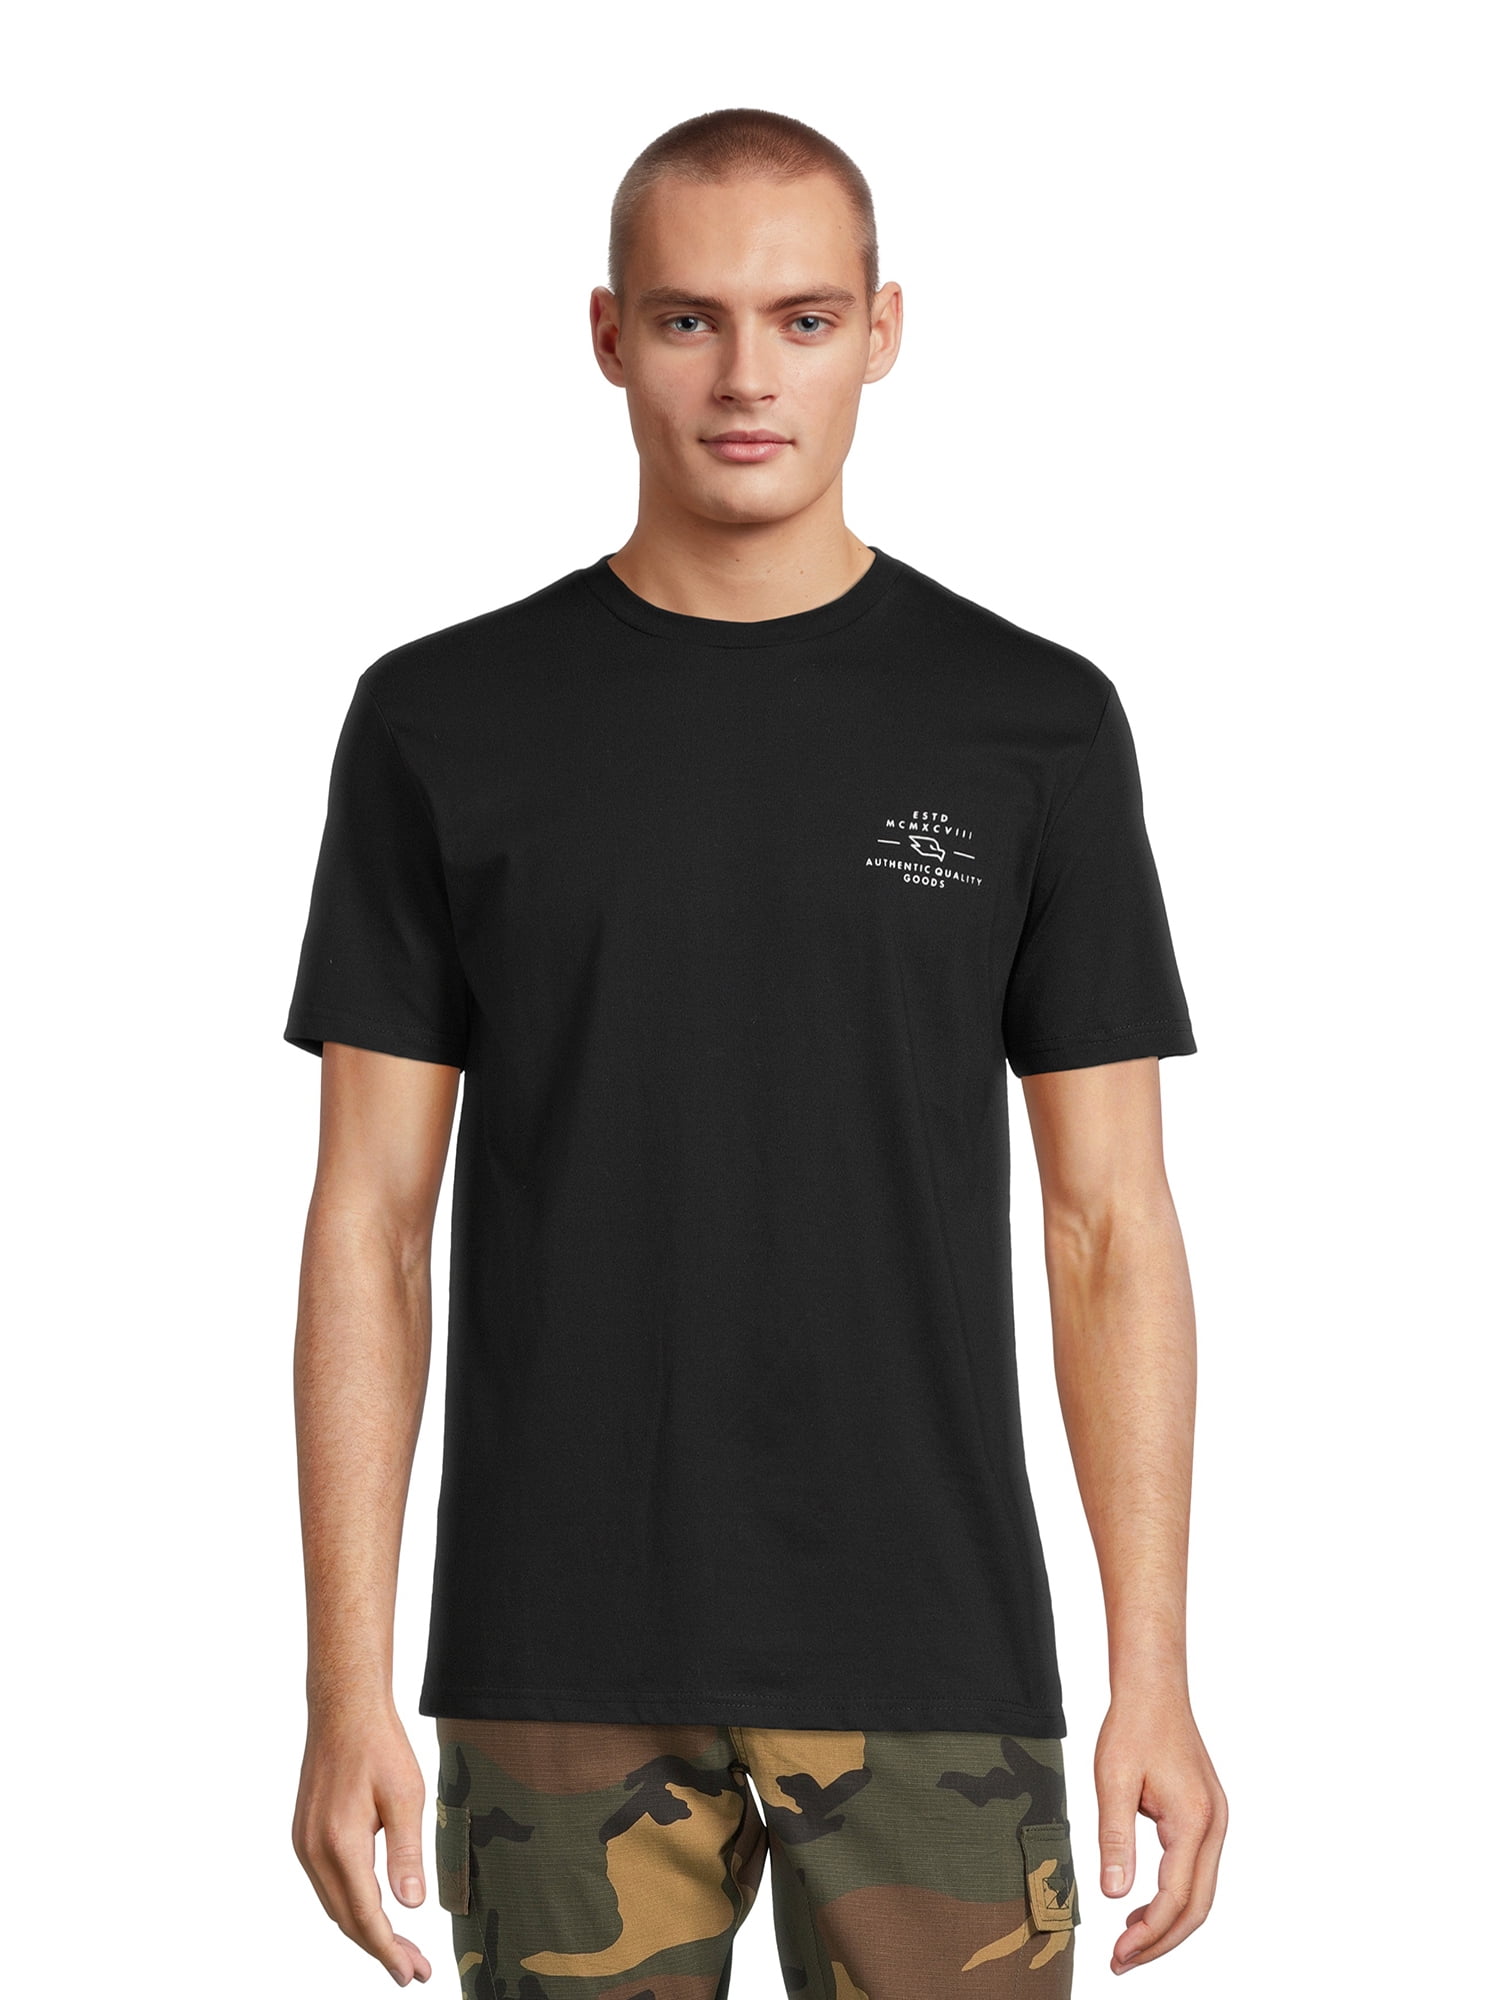 Tony Hawk Men's Chest Script Graphic Tee with Short Sleeves, Sizes S-XL ...